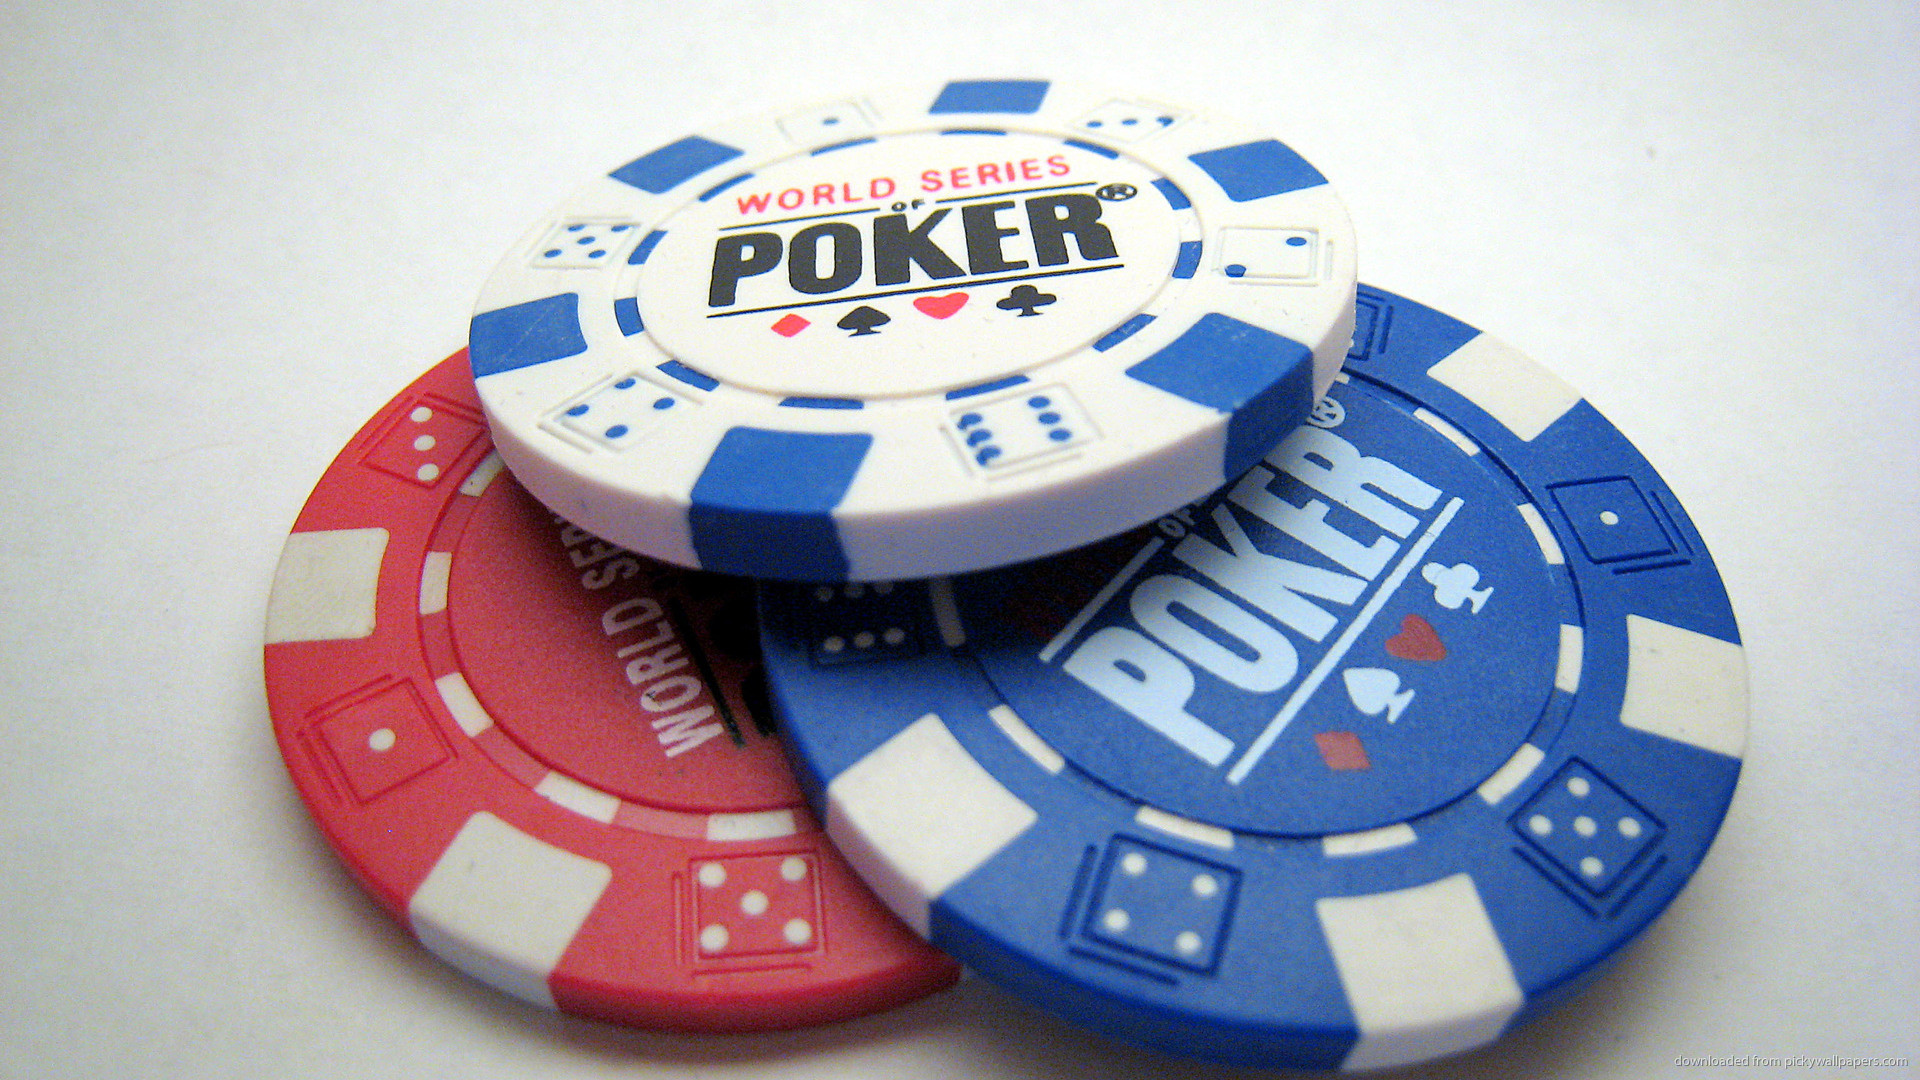 1920x1080 World Series Poker Chips picture